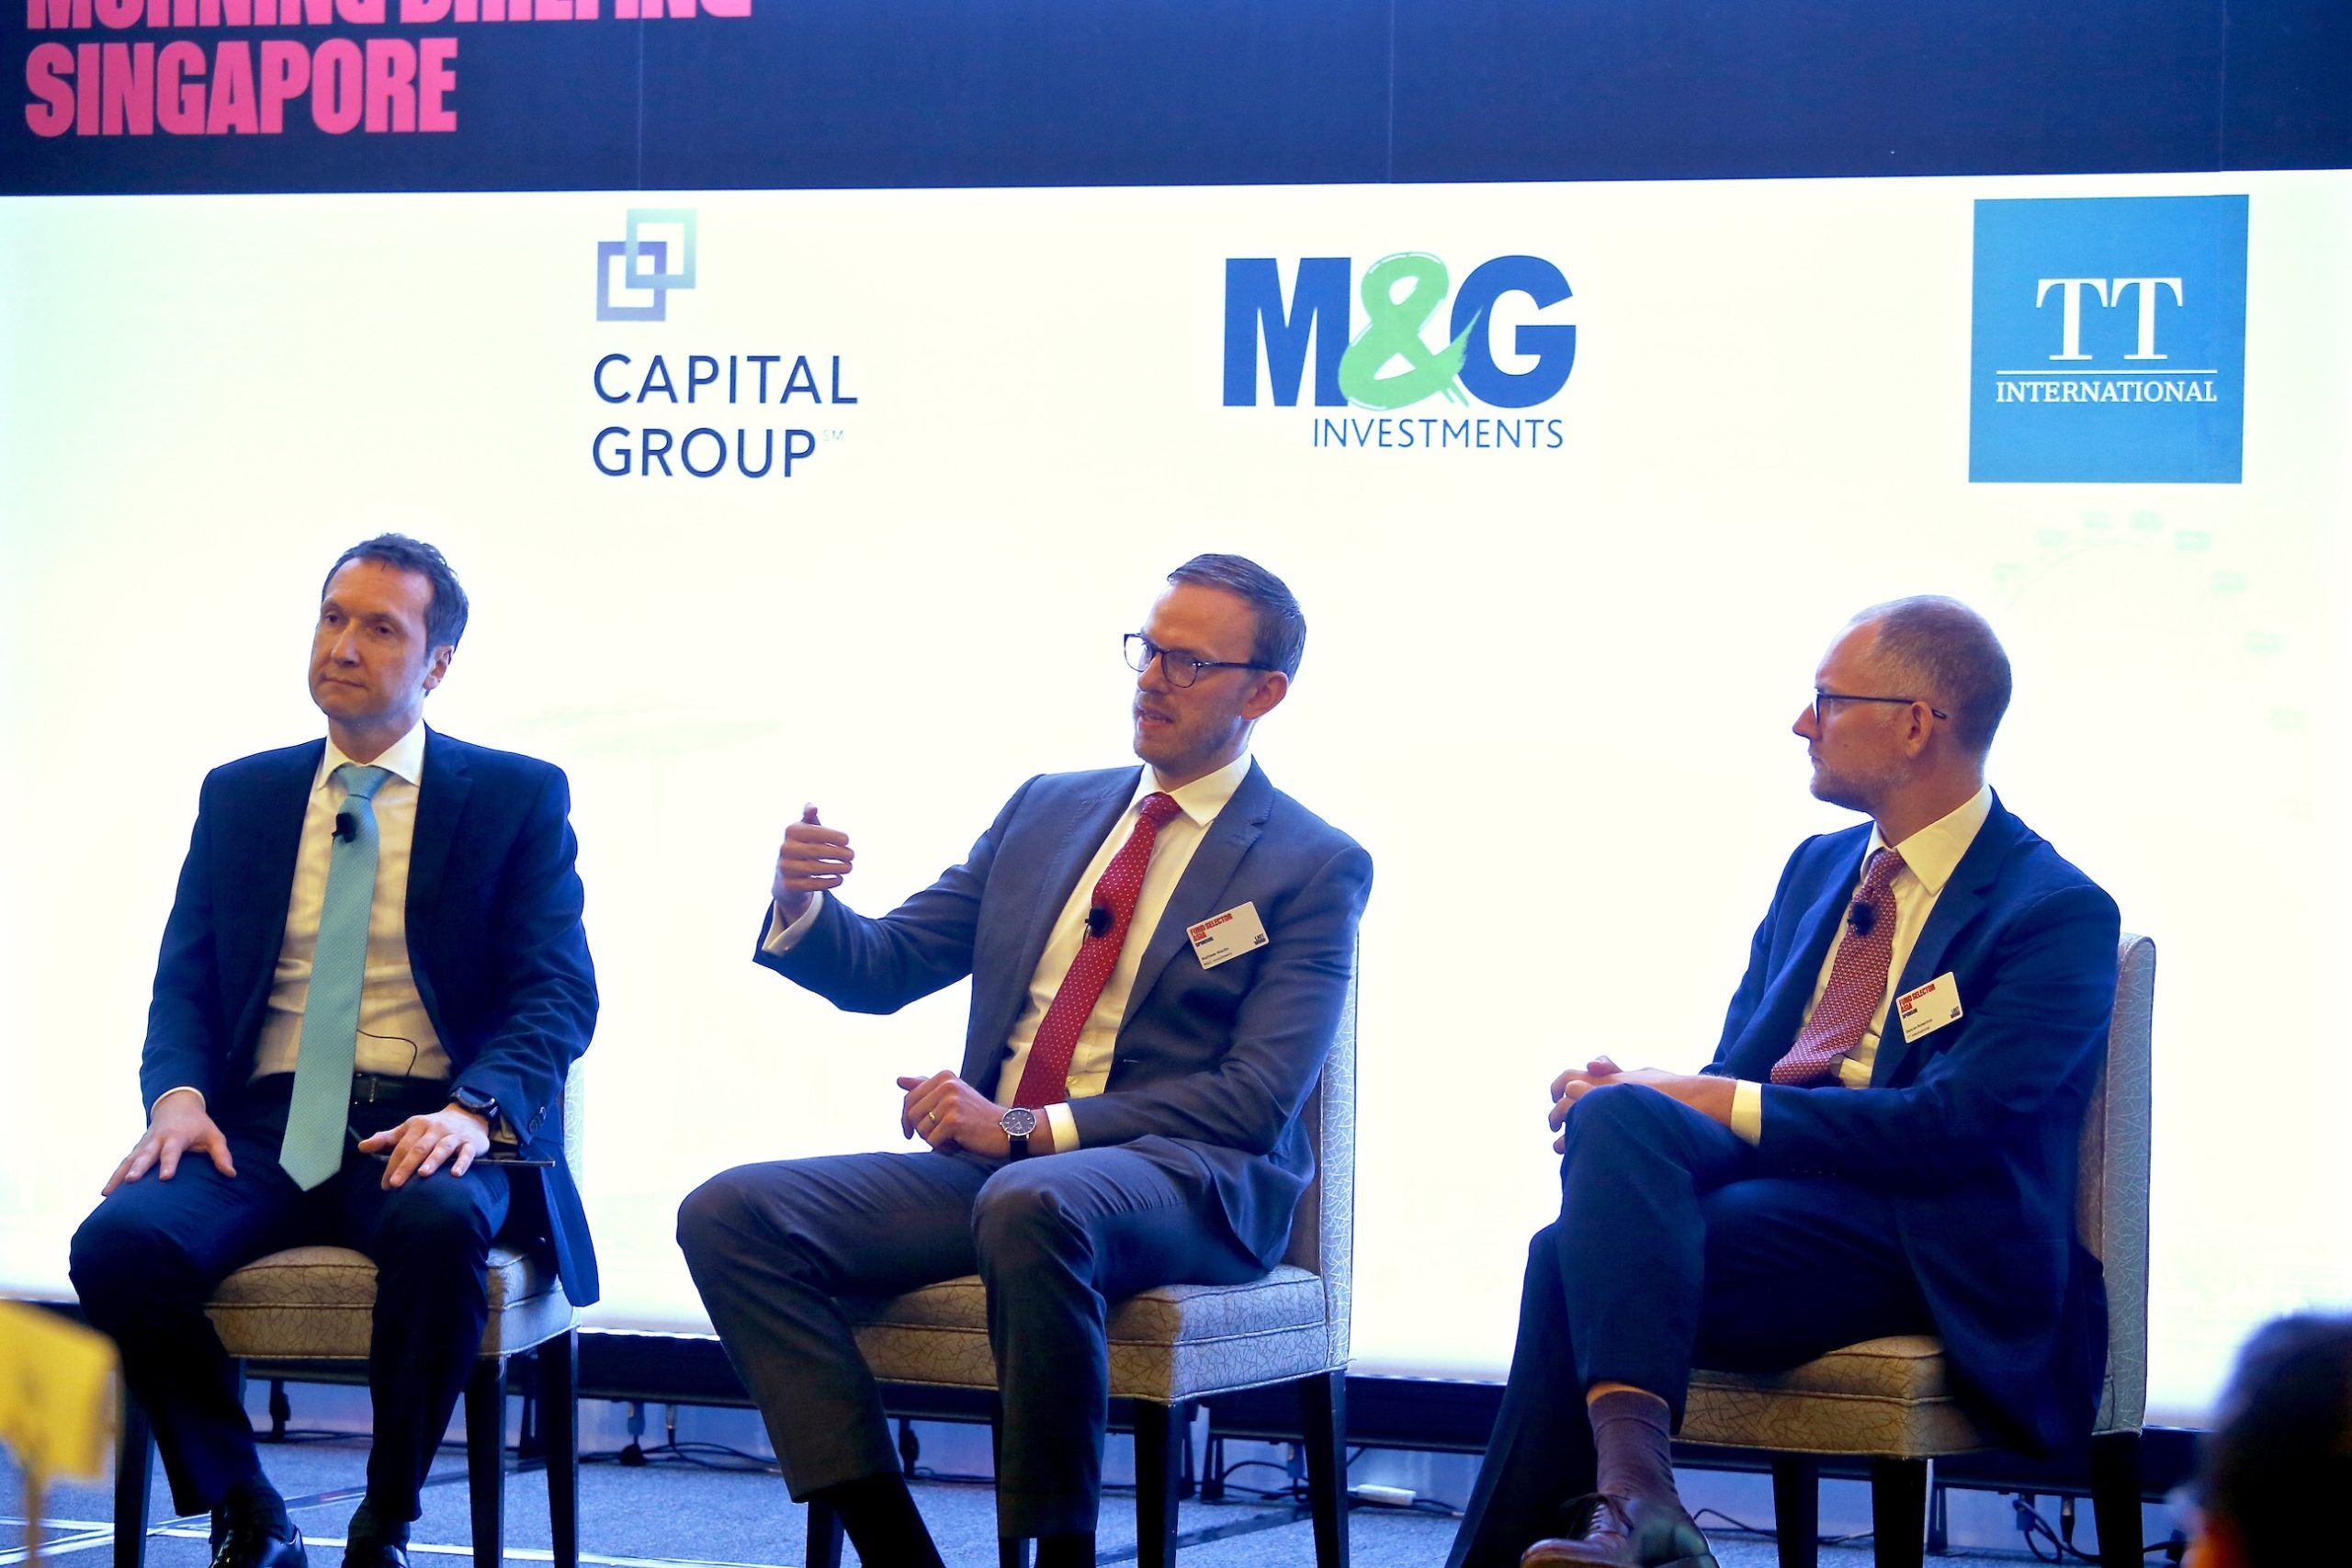 Panel discussion in Singapore